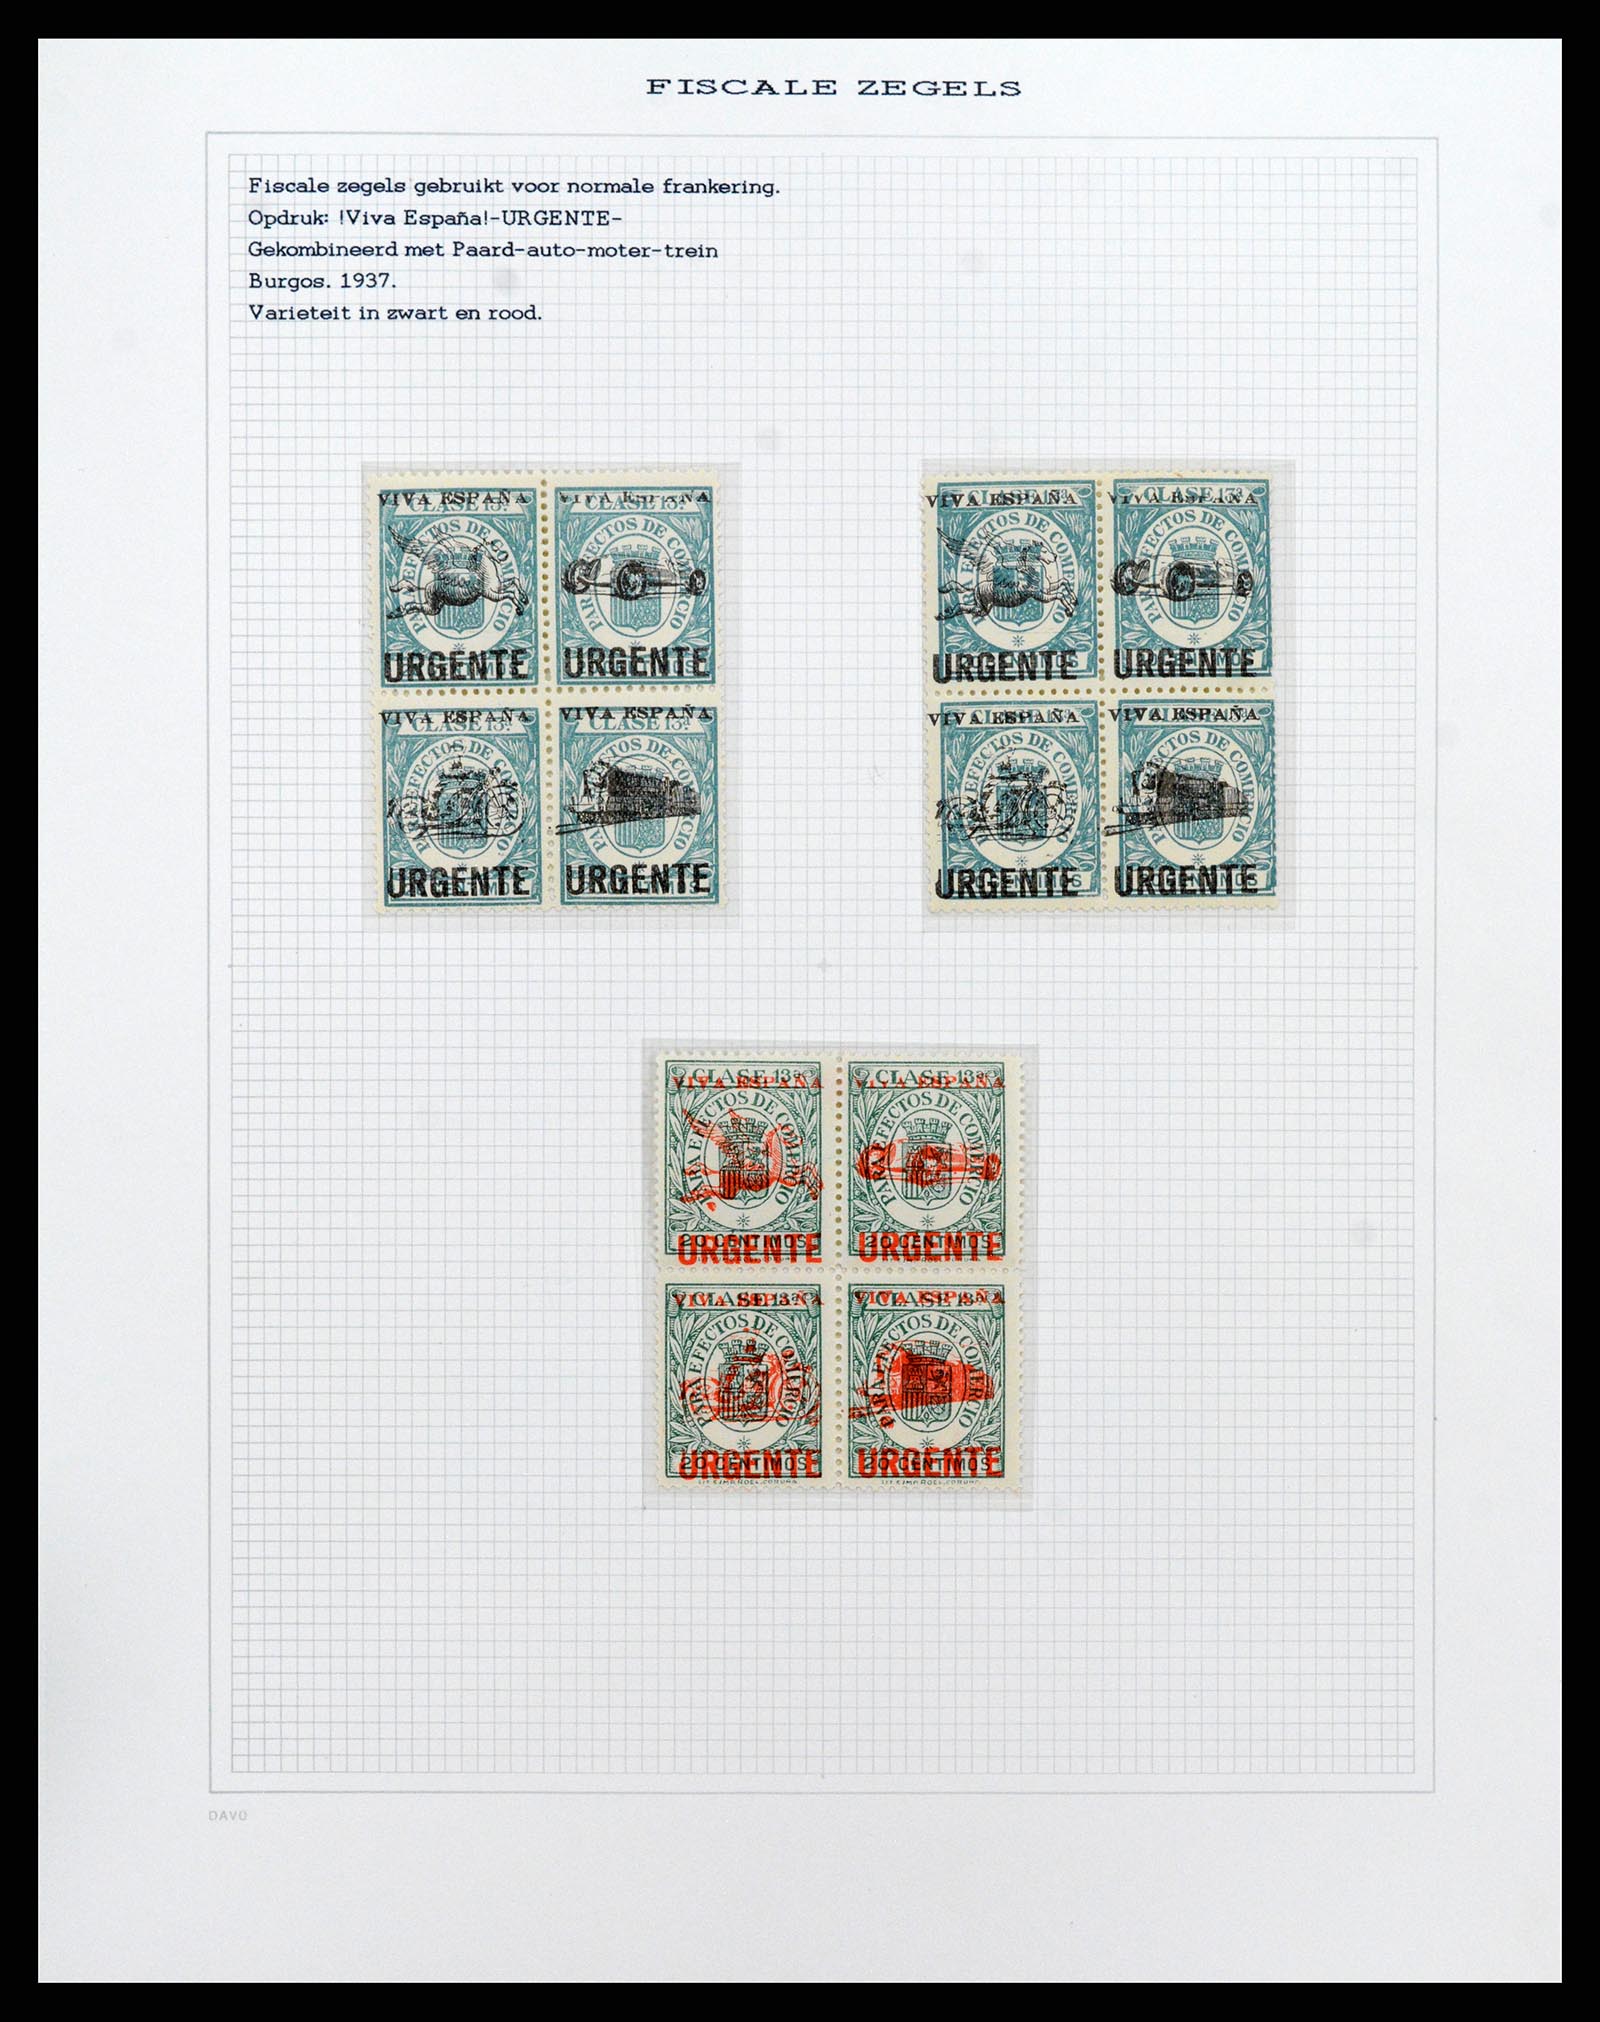 37837 217 - Stamp Collection 37837 Spansish civil war and local post 1893-1945.